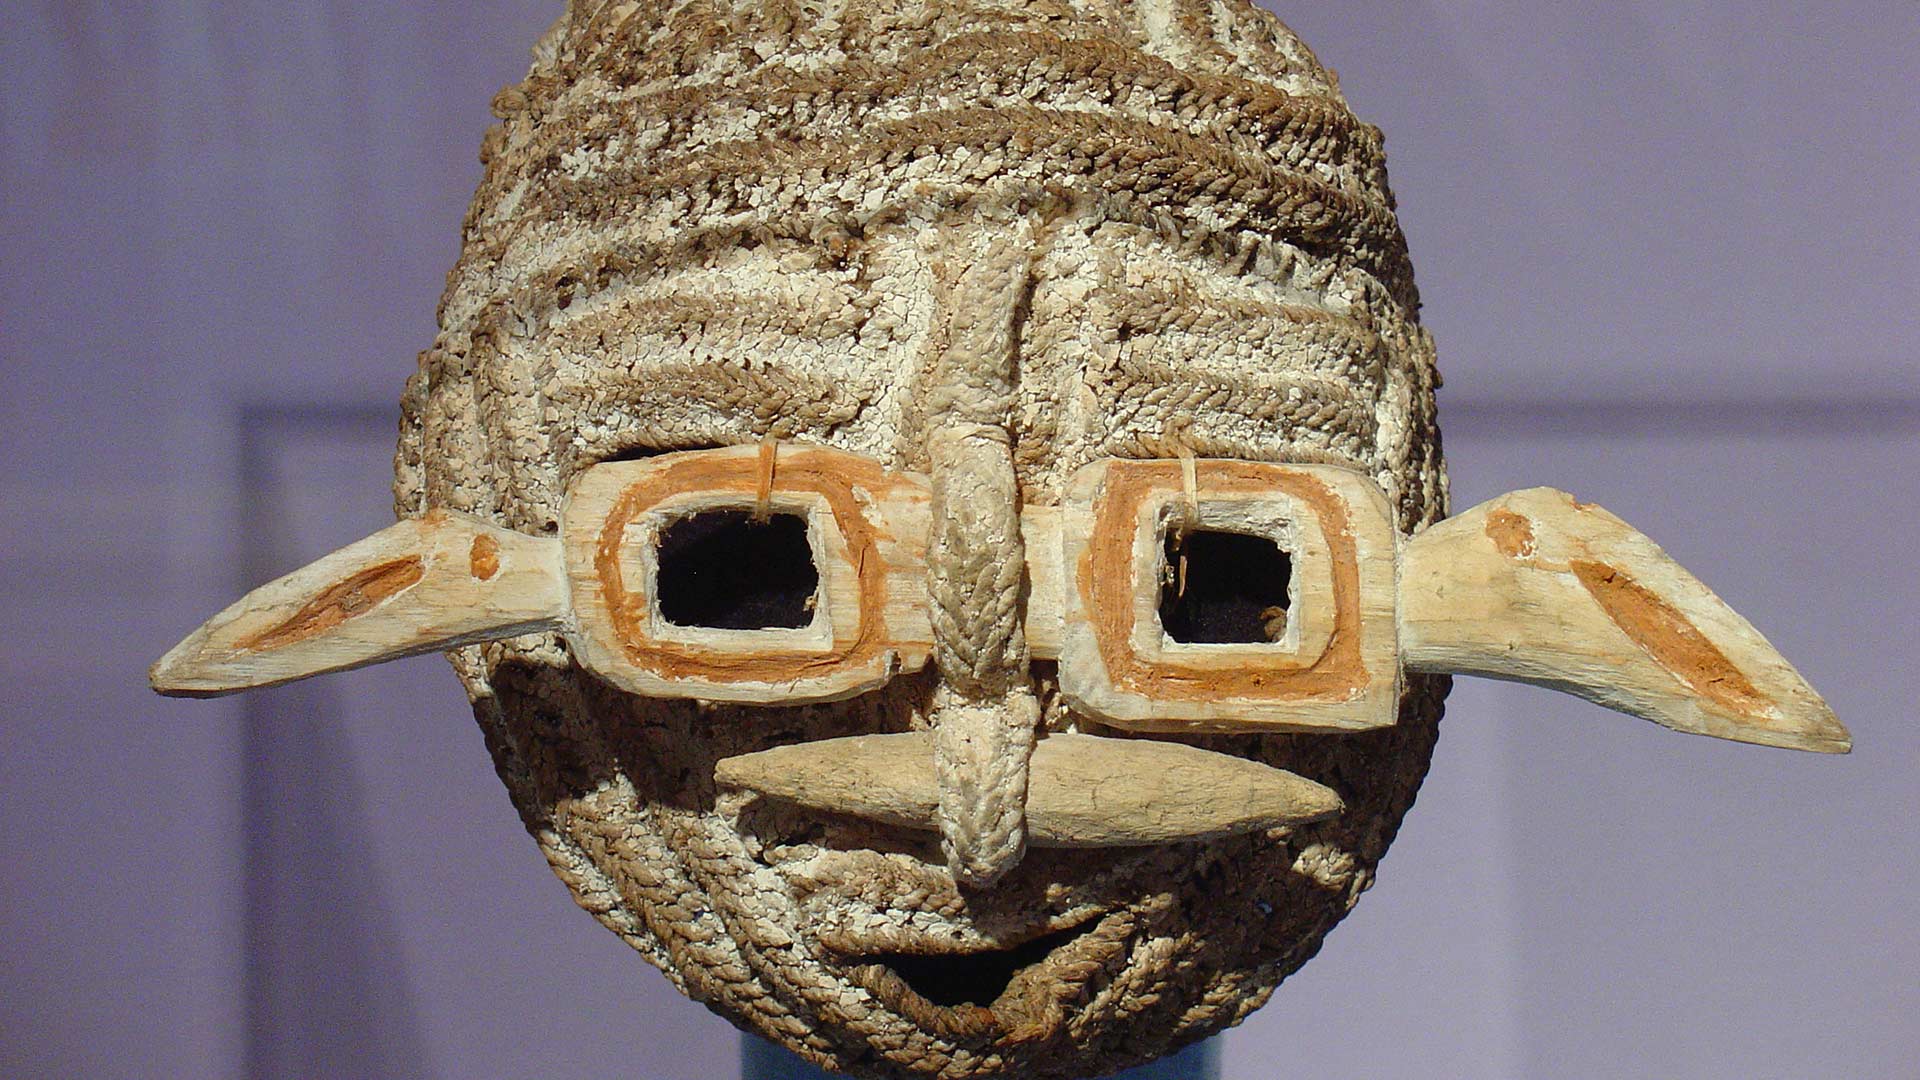 a crafted mask made of wood and another woven material